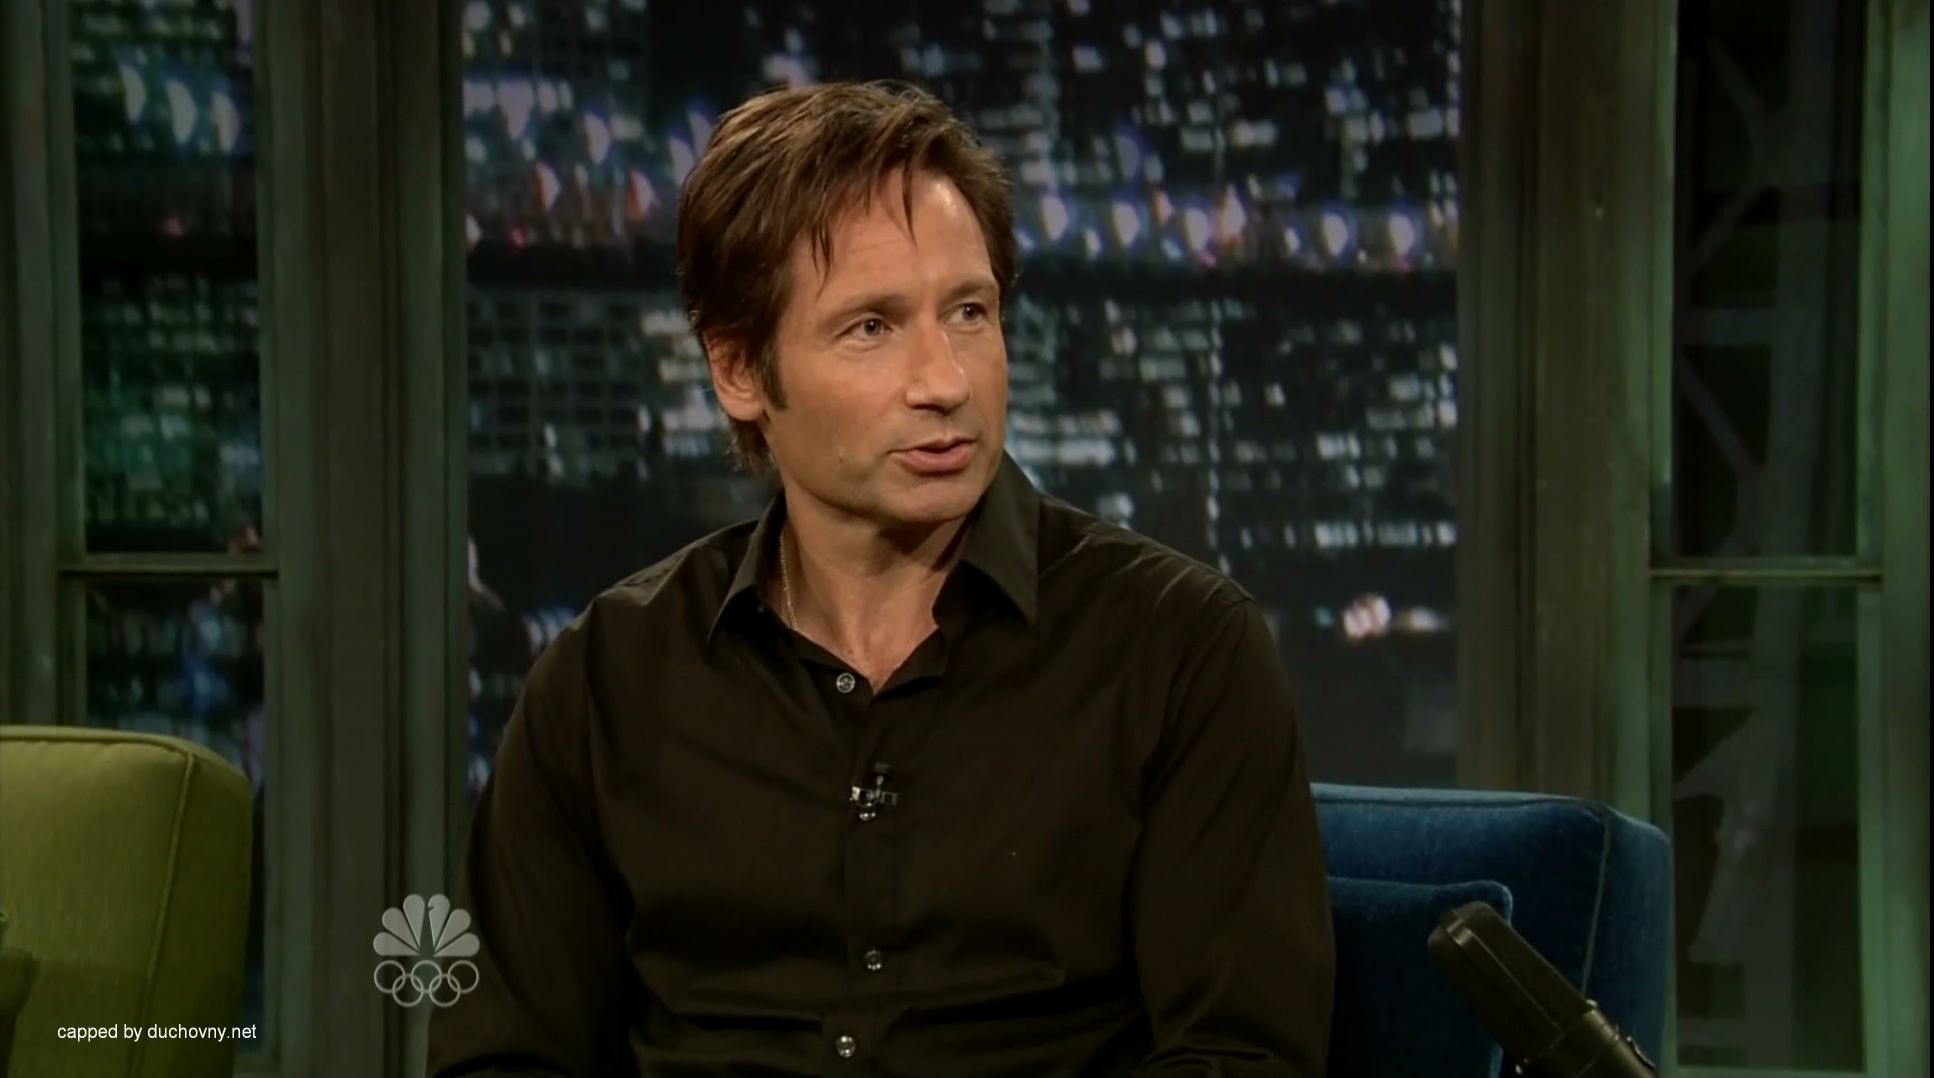 David Duchovny Image: David Duchovny -- Late Night with Jimmy Fallon.